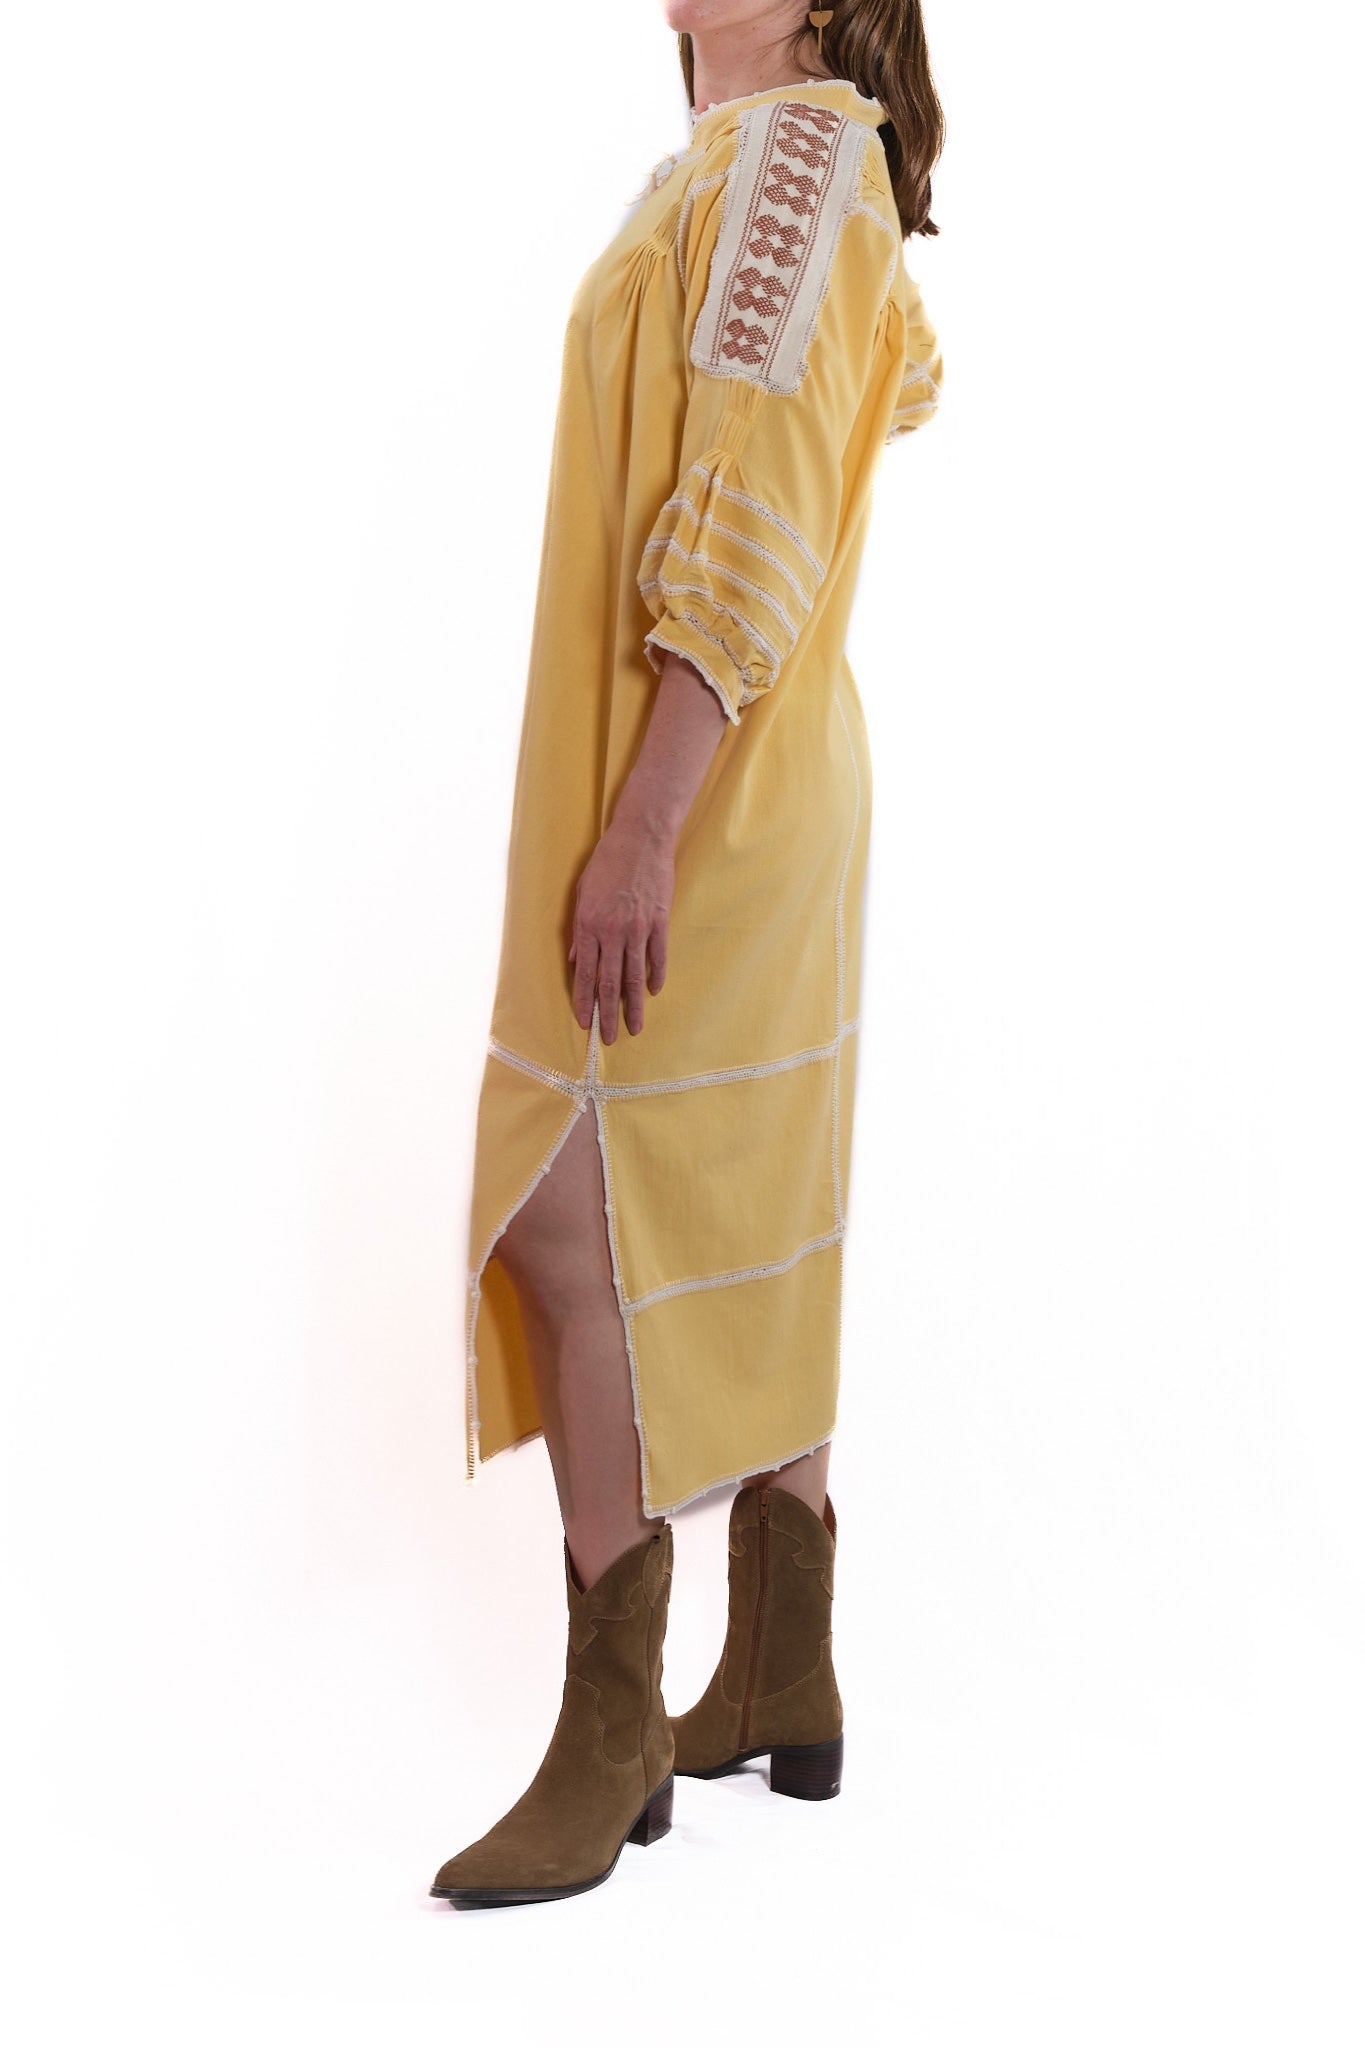 Odilia Dress yellow with white and brown embroidery